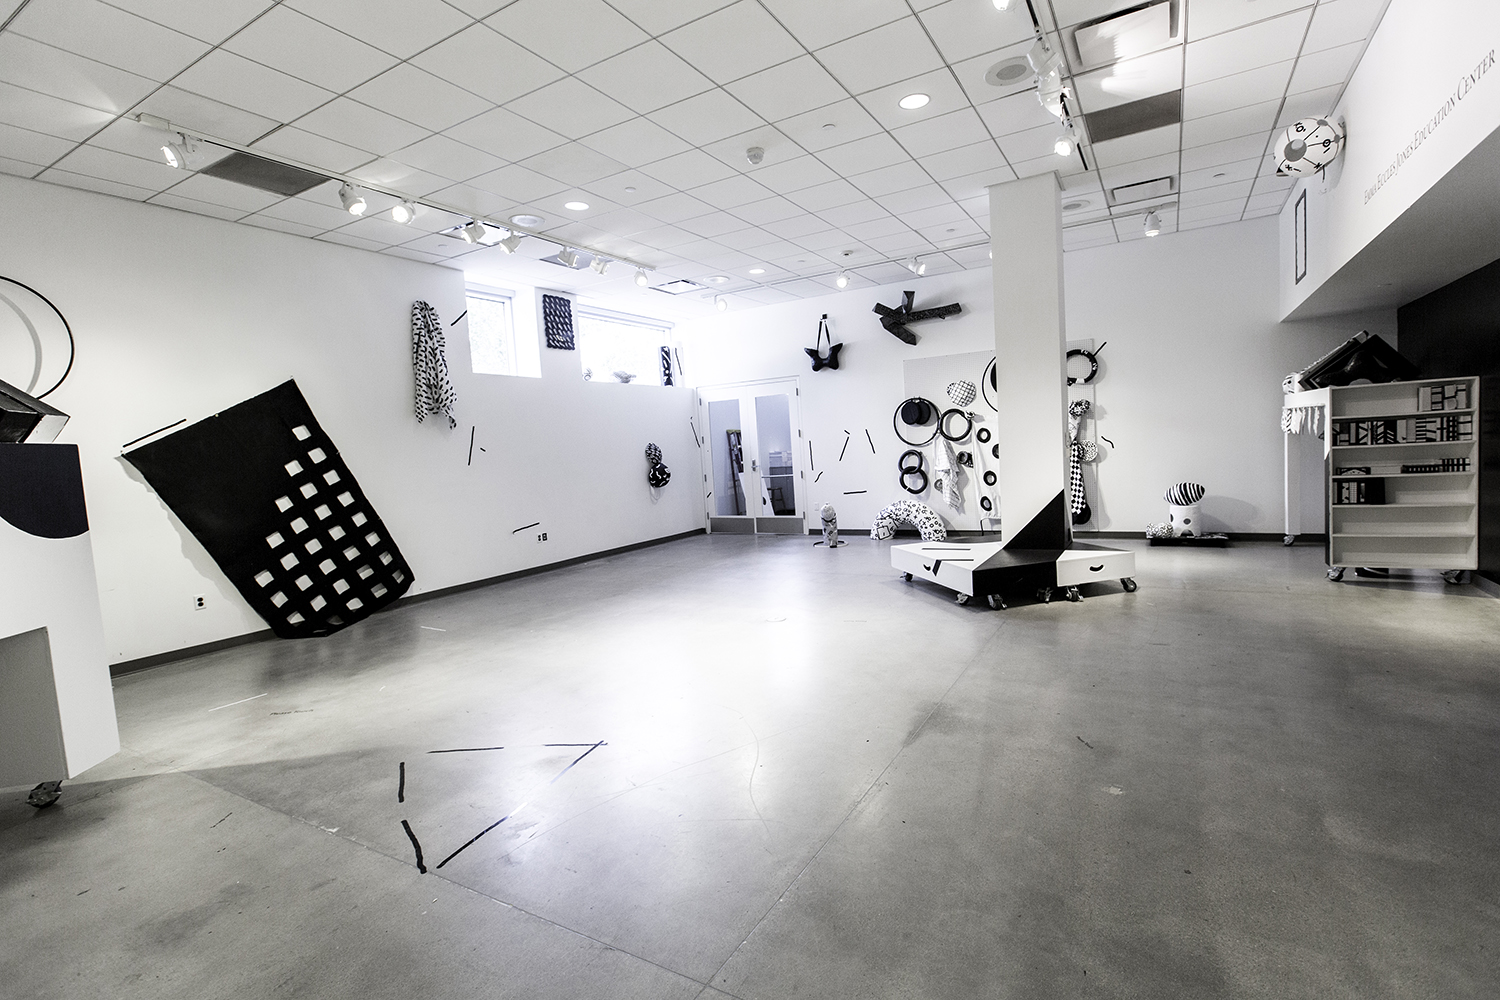 a large gallery room with a cement floor and white walls, there are black and white abstract sculptures scattered throughout the room